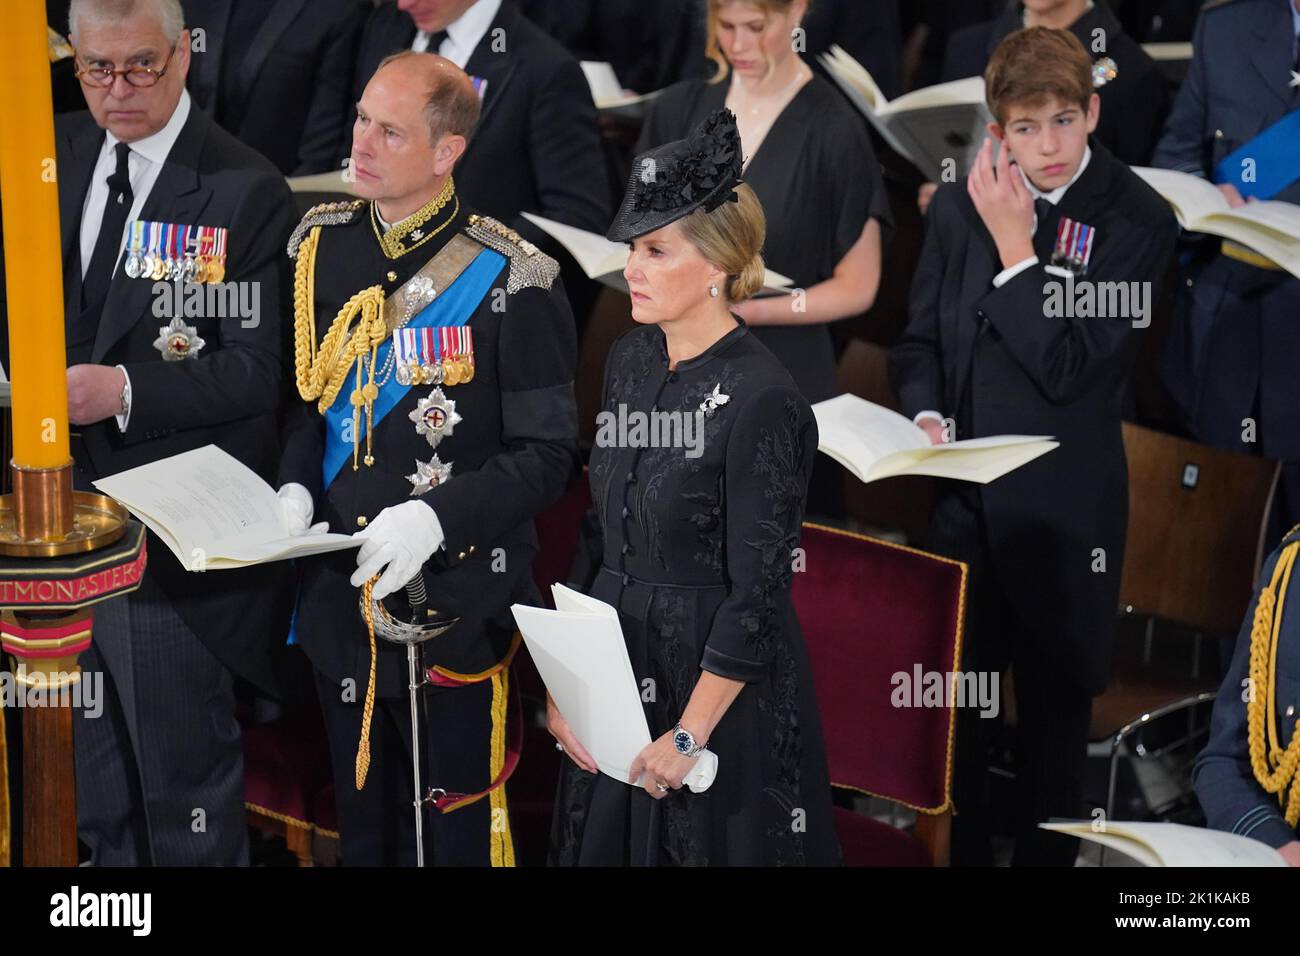 (left to right) The Duke of York, the Earl of Wessex, the Countess of Wessex and James, Viscount Severn during State Funeral of Queen Elizabeth II at the Abbey in London. Picture date: Monday September 19, 2022. Stock Photo